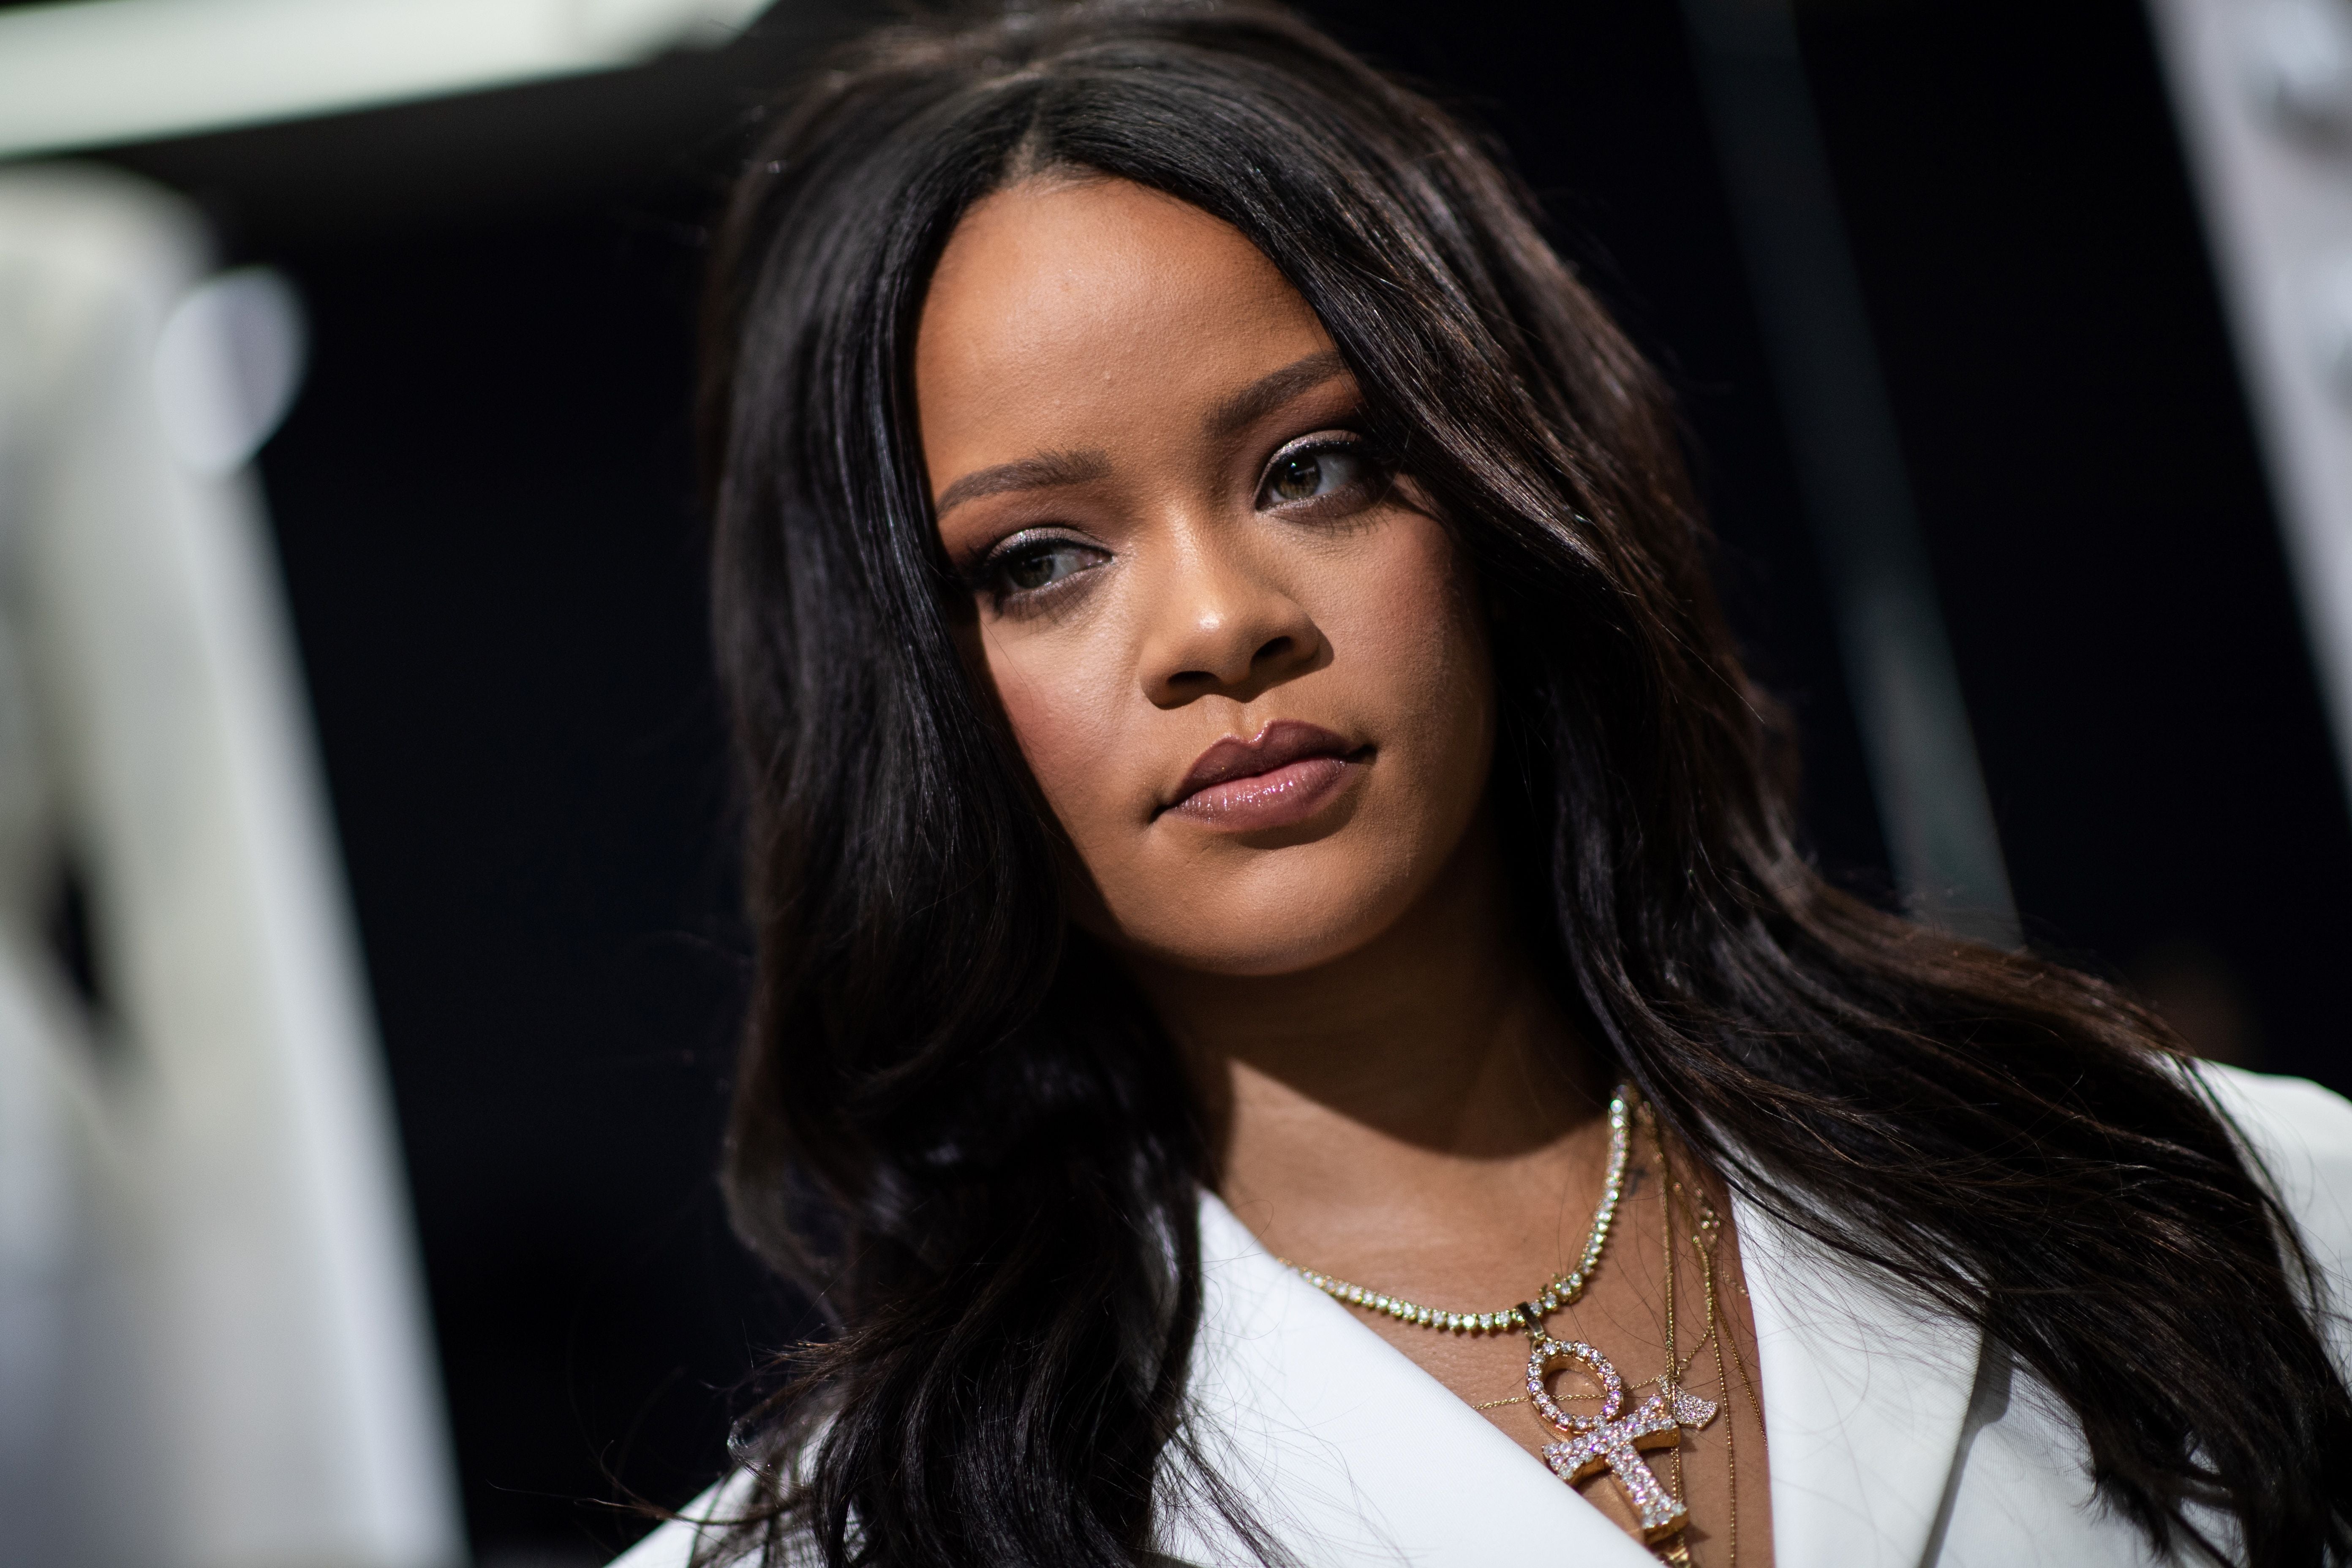 Rihanna Opens Up About Her Relationship: 'It Matters To Me'